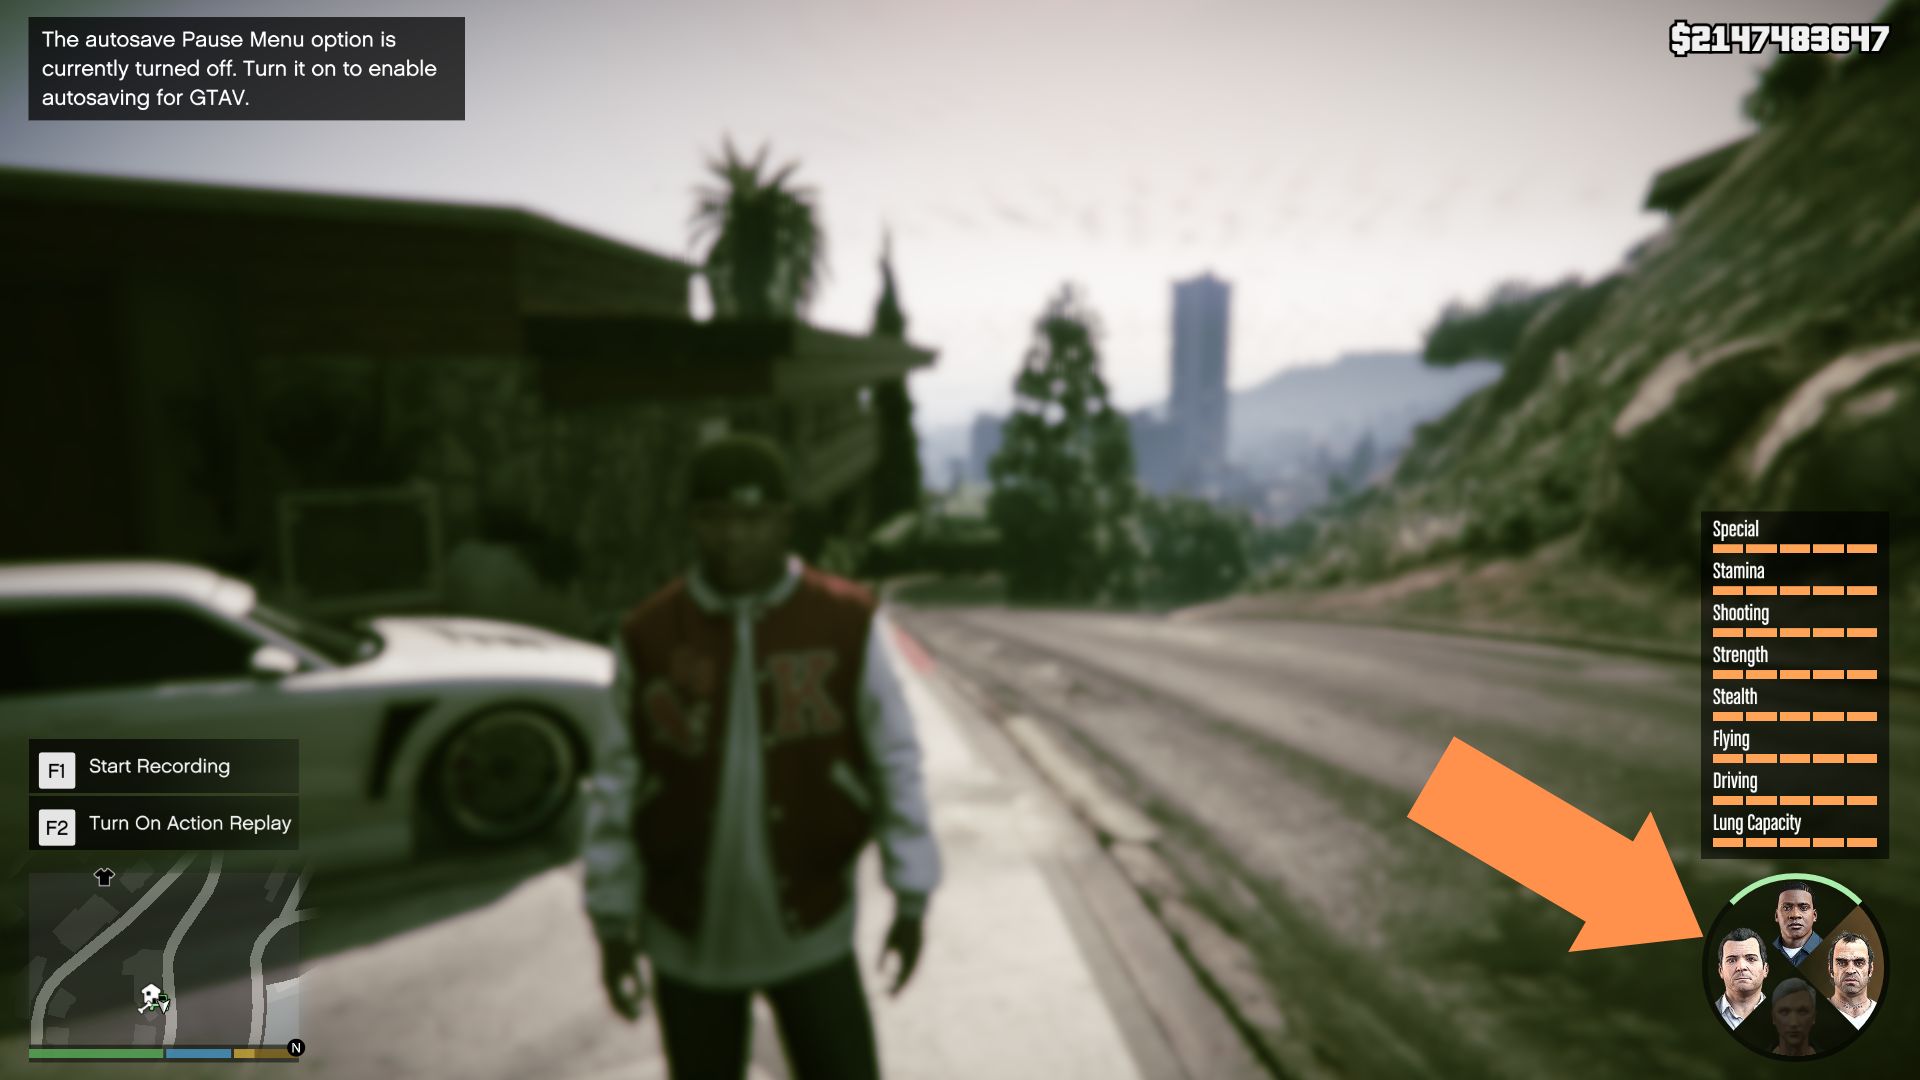 You can switch characters in GTA 5 